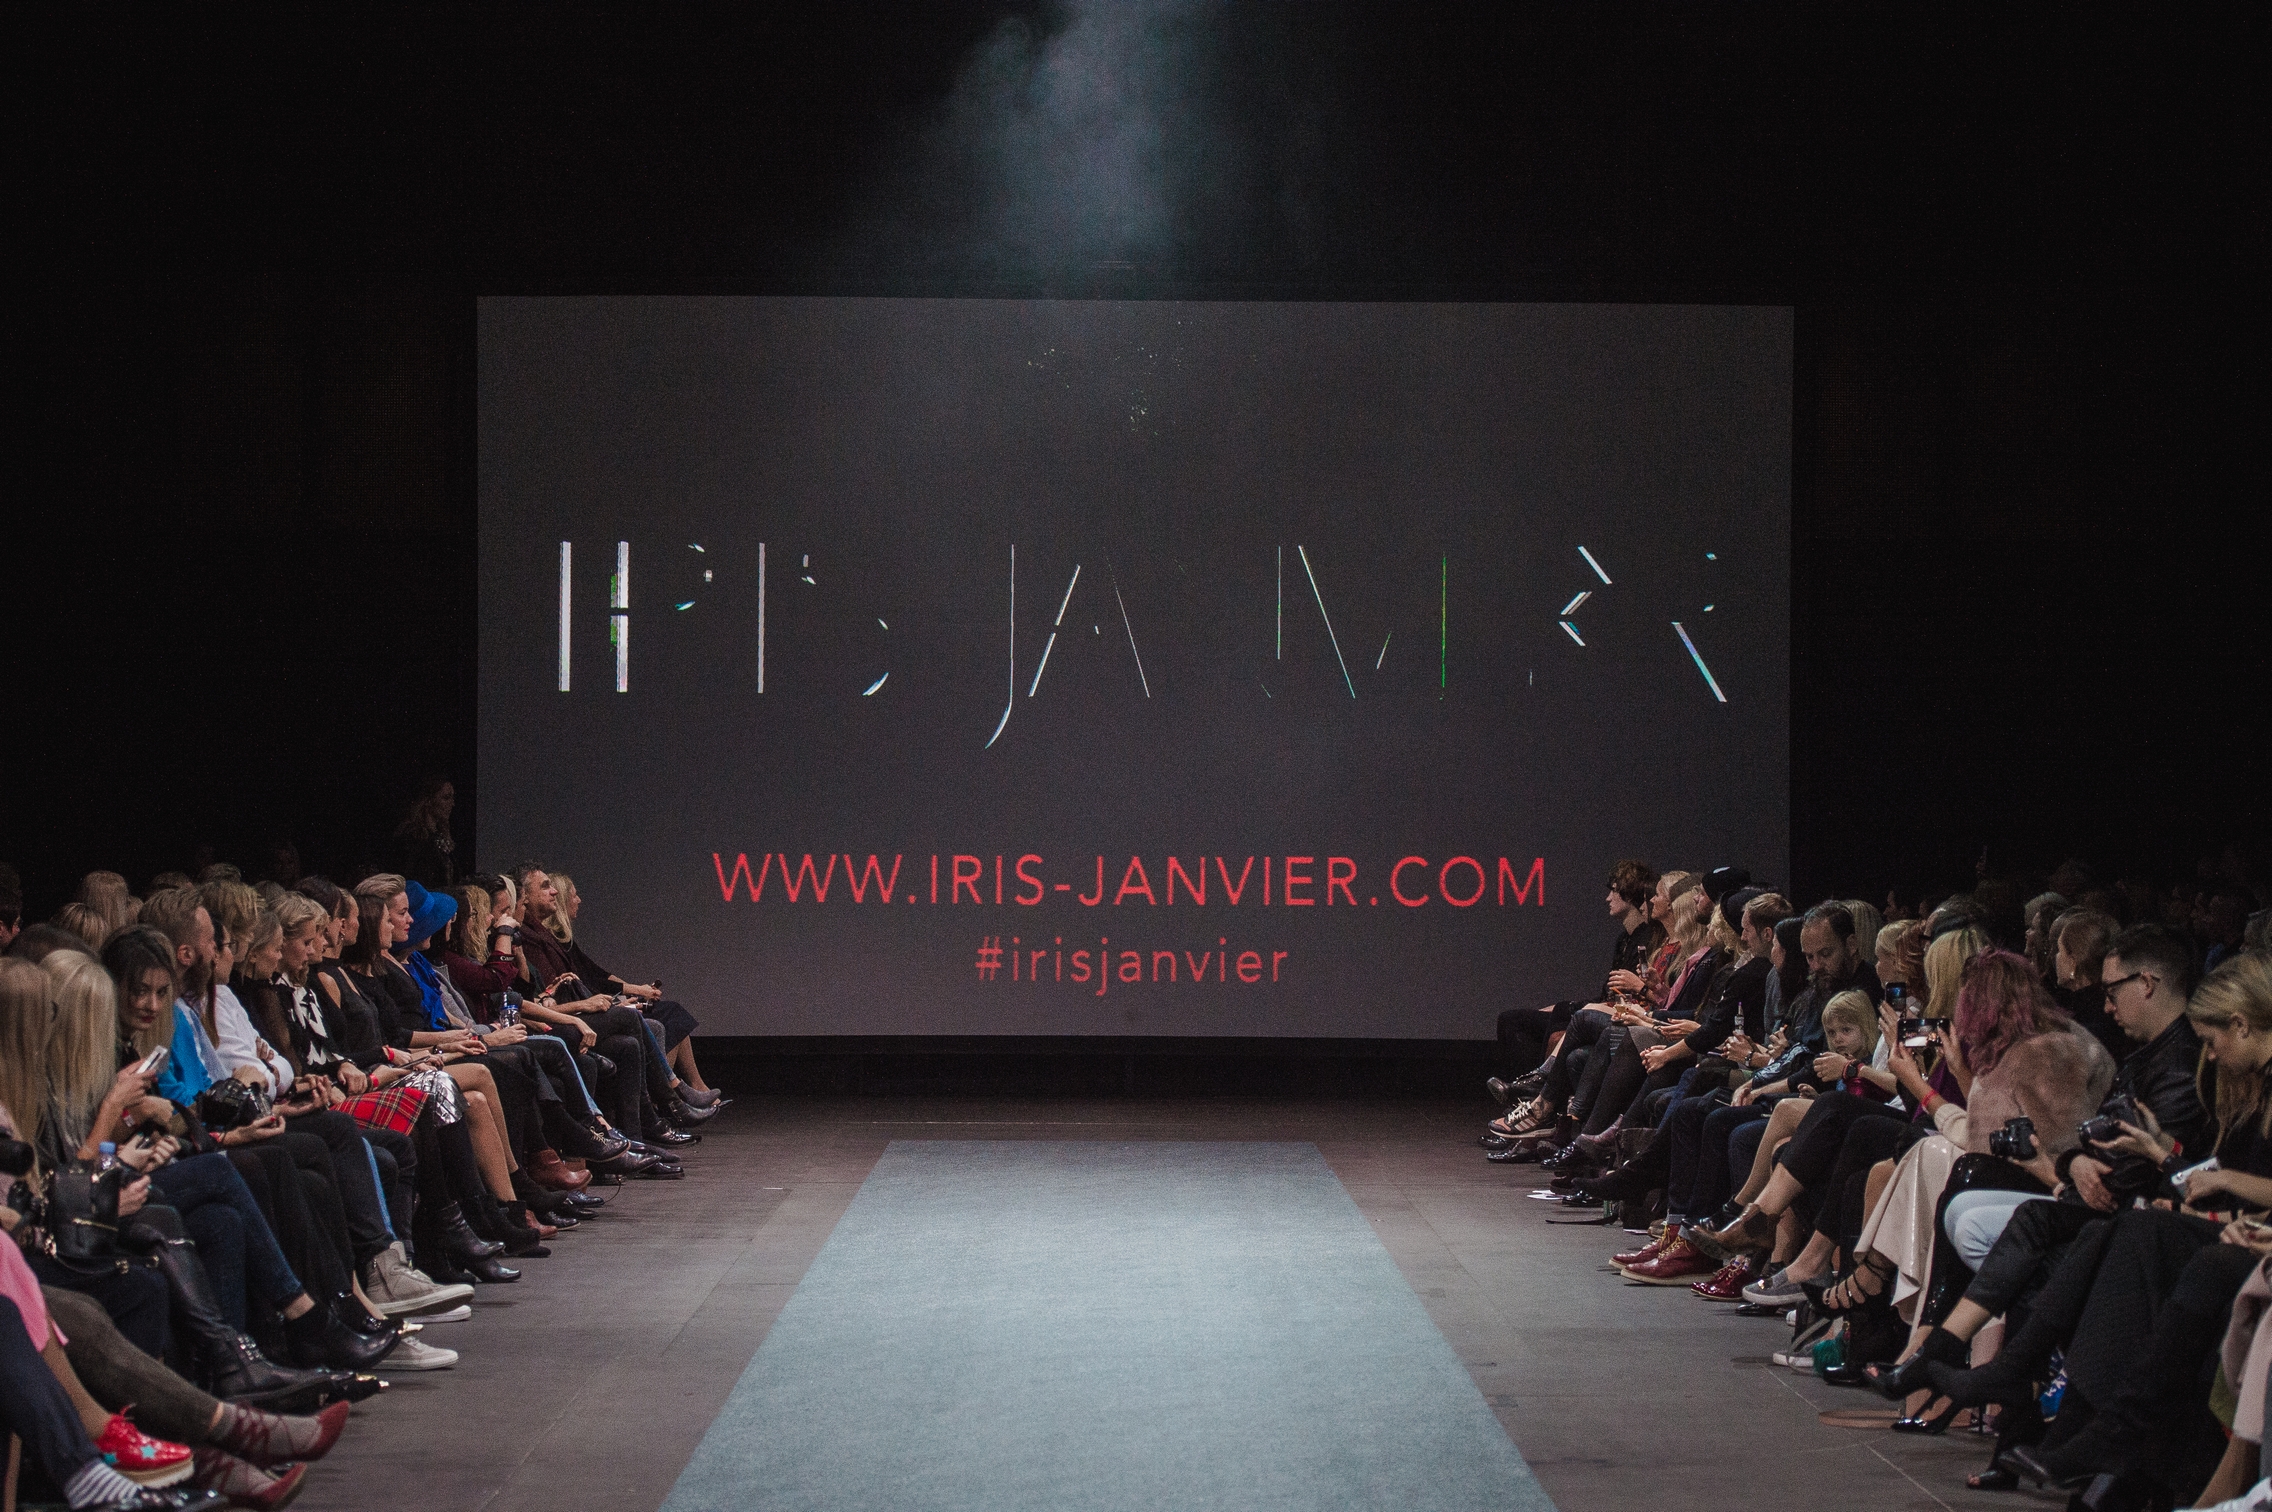 IRIS JANVIER A/W16/17 STRAIGHT FROM THE RUNWAY VIDEO @ TFW